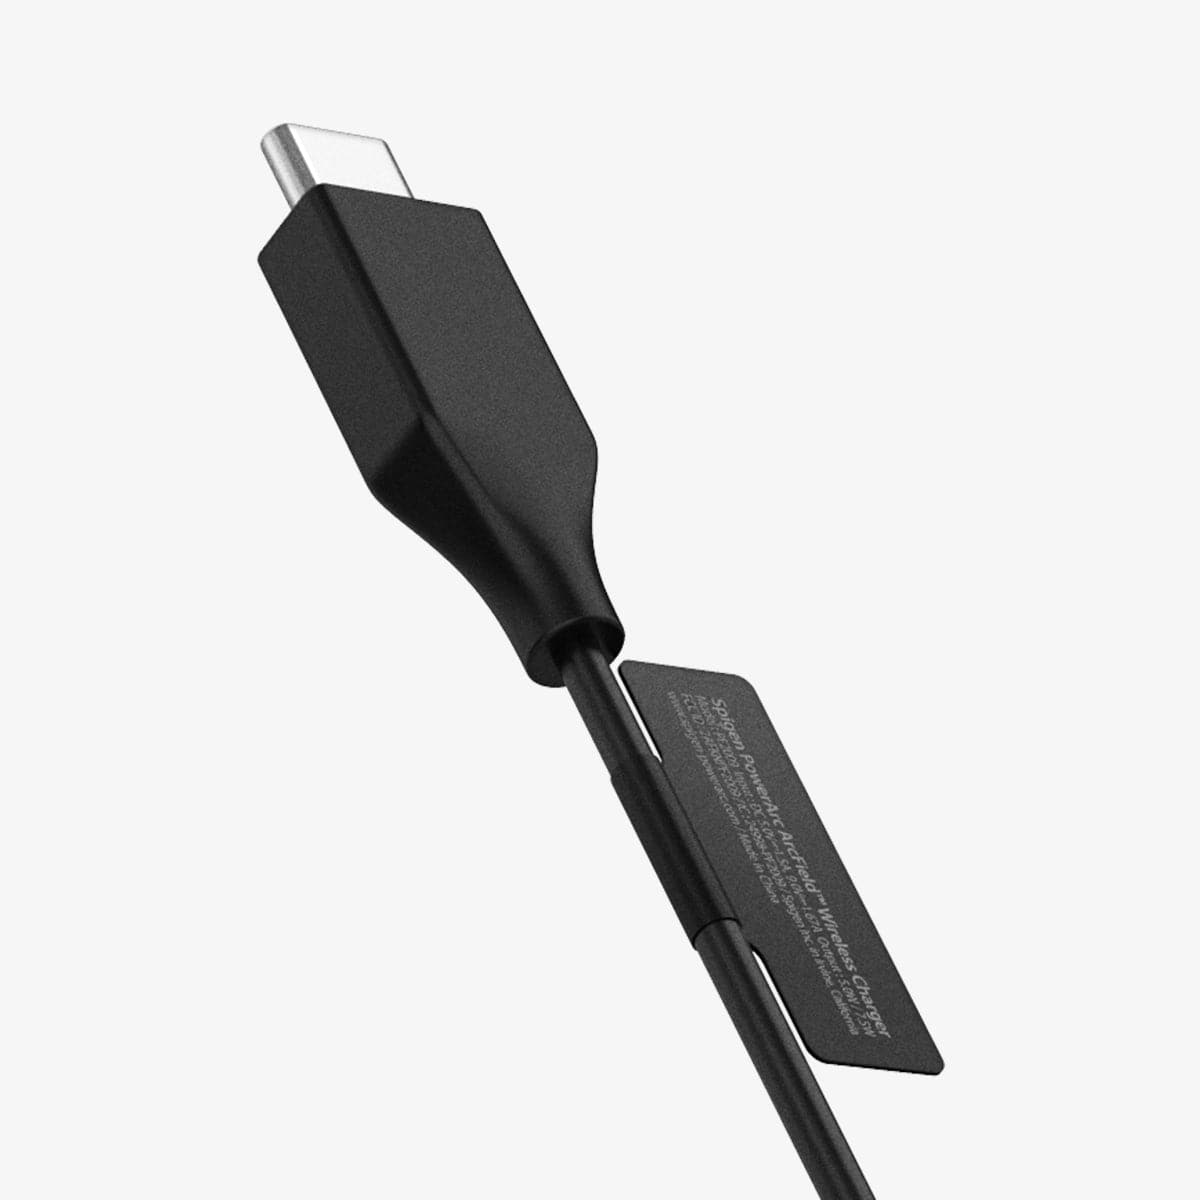 ACH02190 - ArcField™ Magnetic Wireless Charger PF2009 (MagFit) in black showing the end of the charging cable